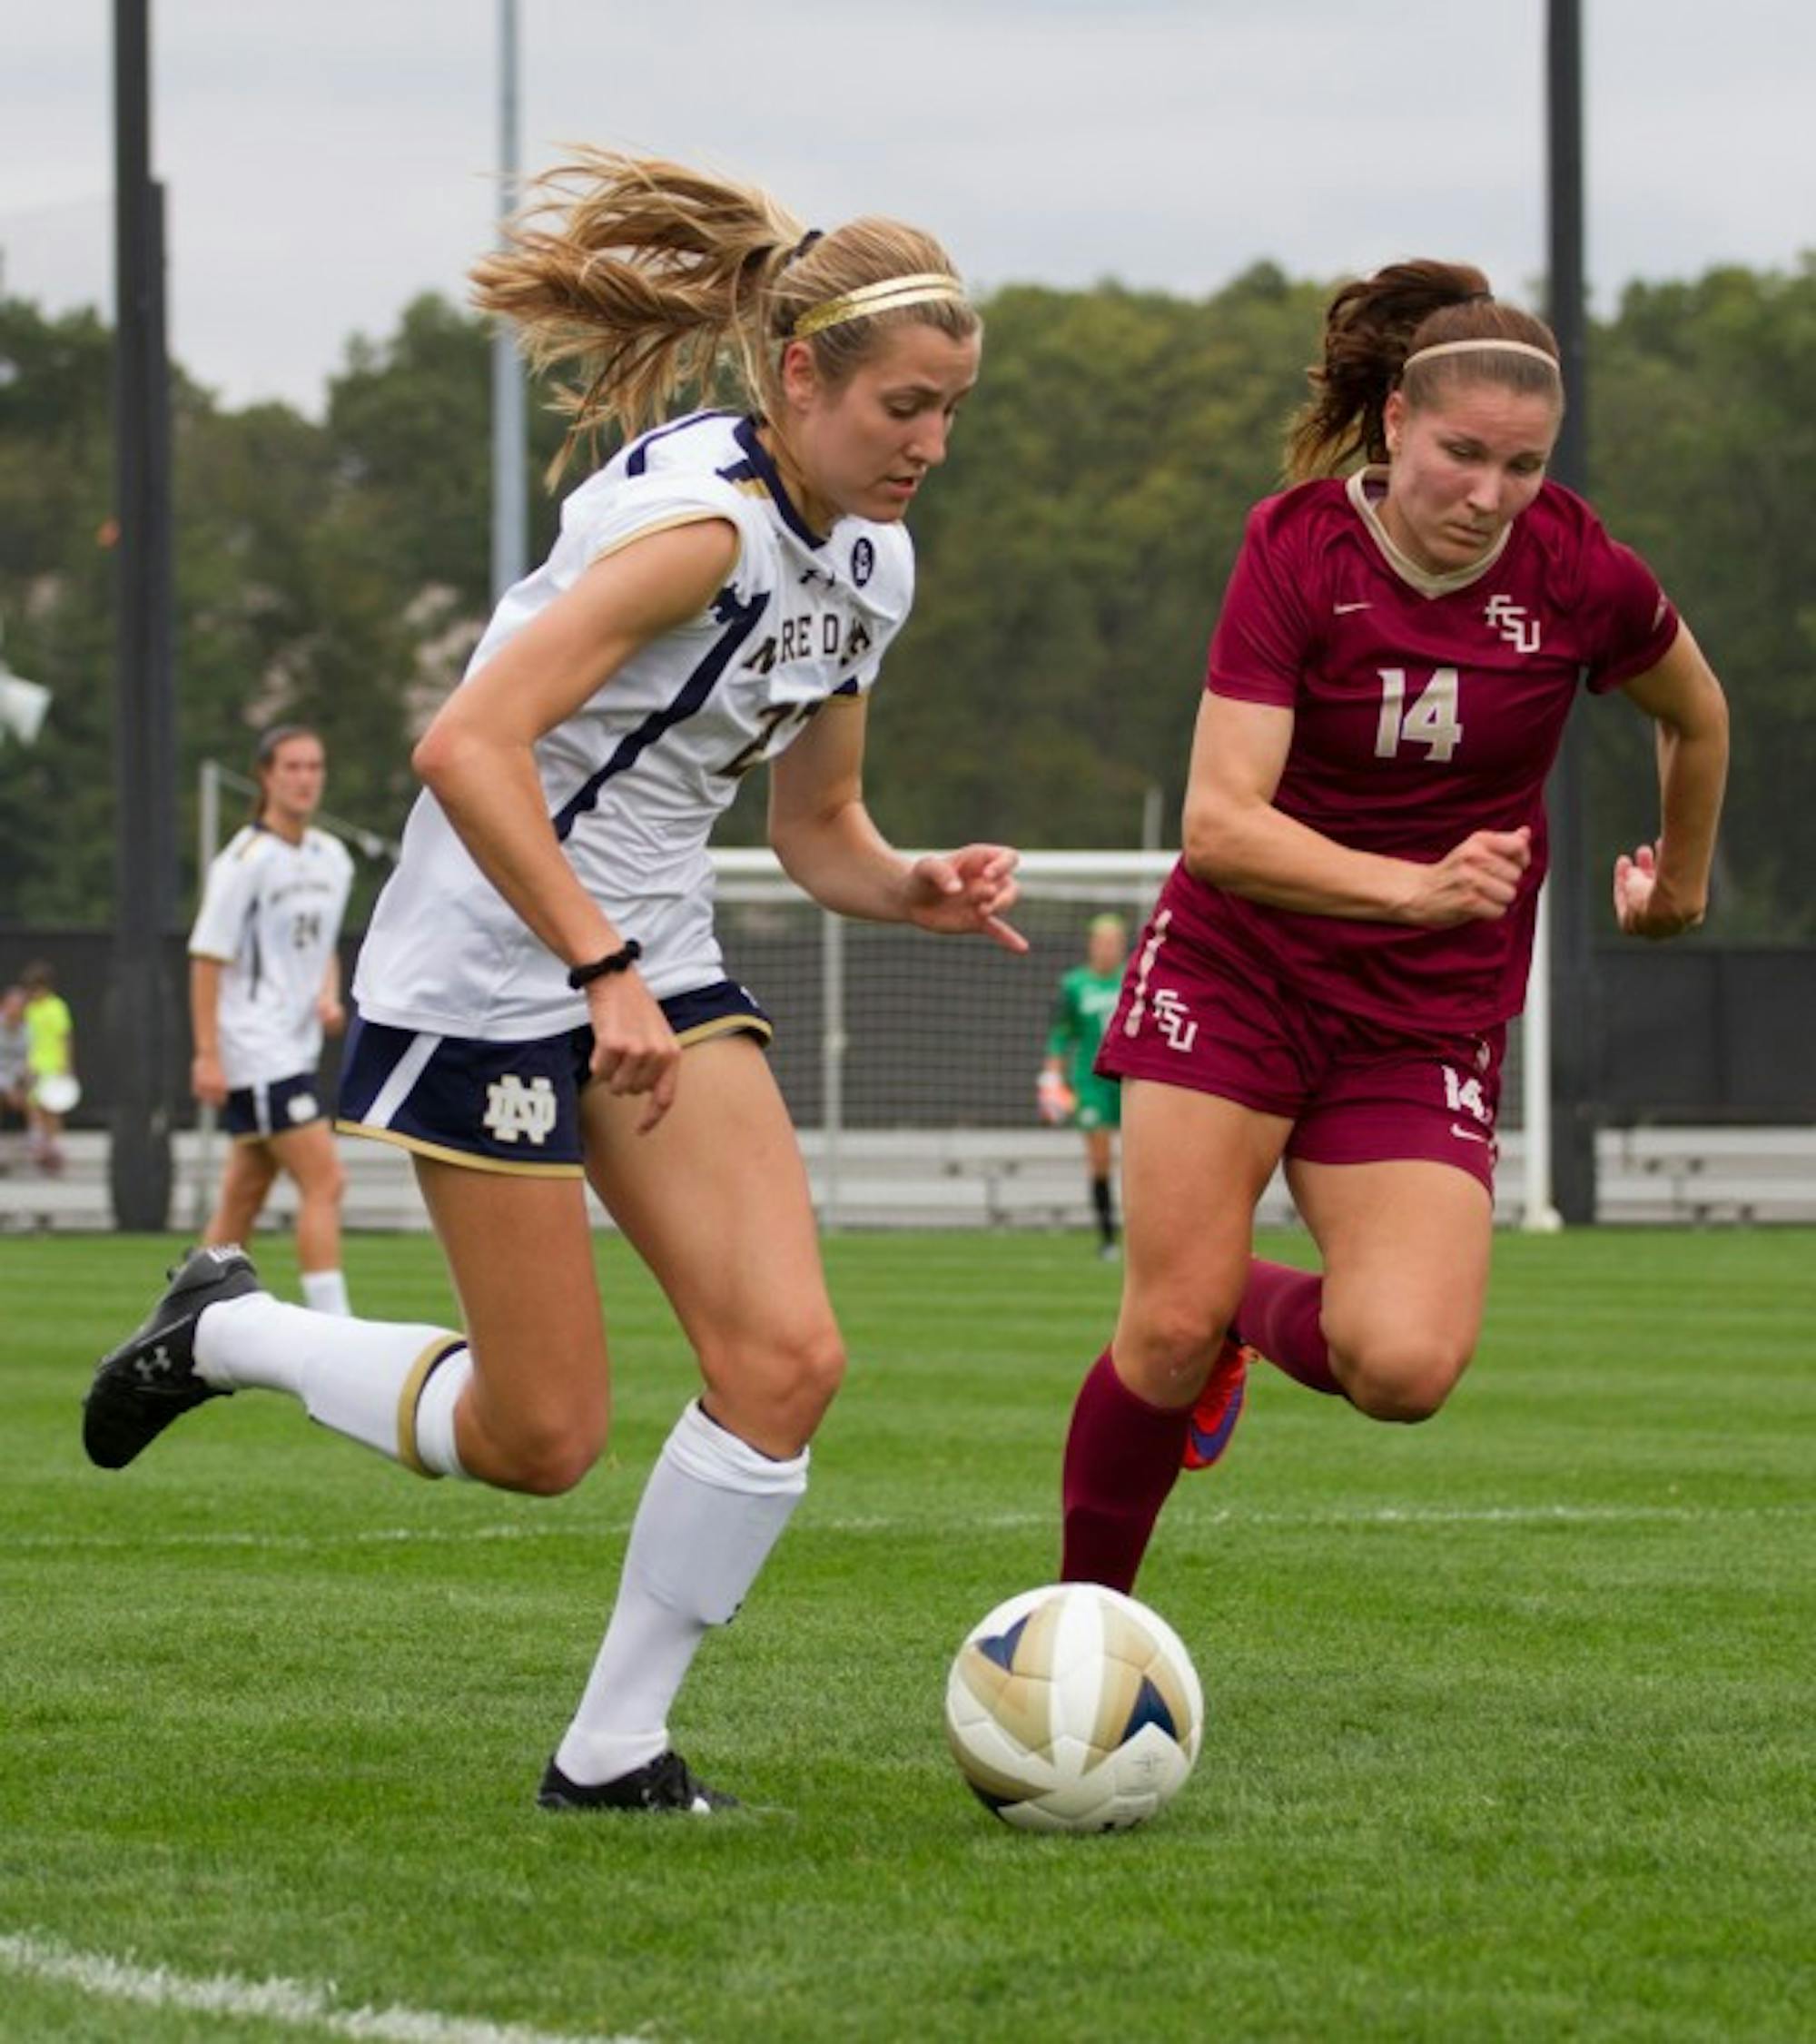 Irish sophomore defender Ginny McGowan dribbles around a defender during a 1-0 loss to Florida State on Sept. 27 at Alumni Stadium. McGowan has started in eight games this season.